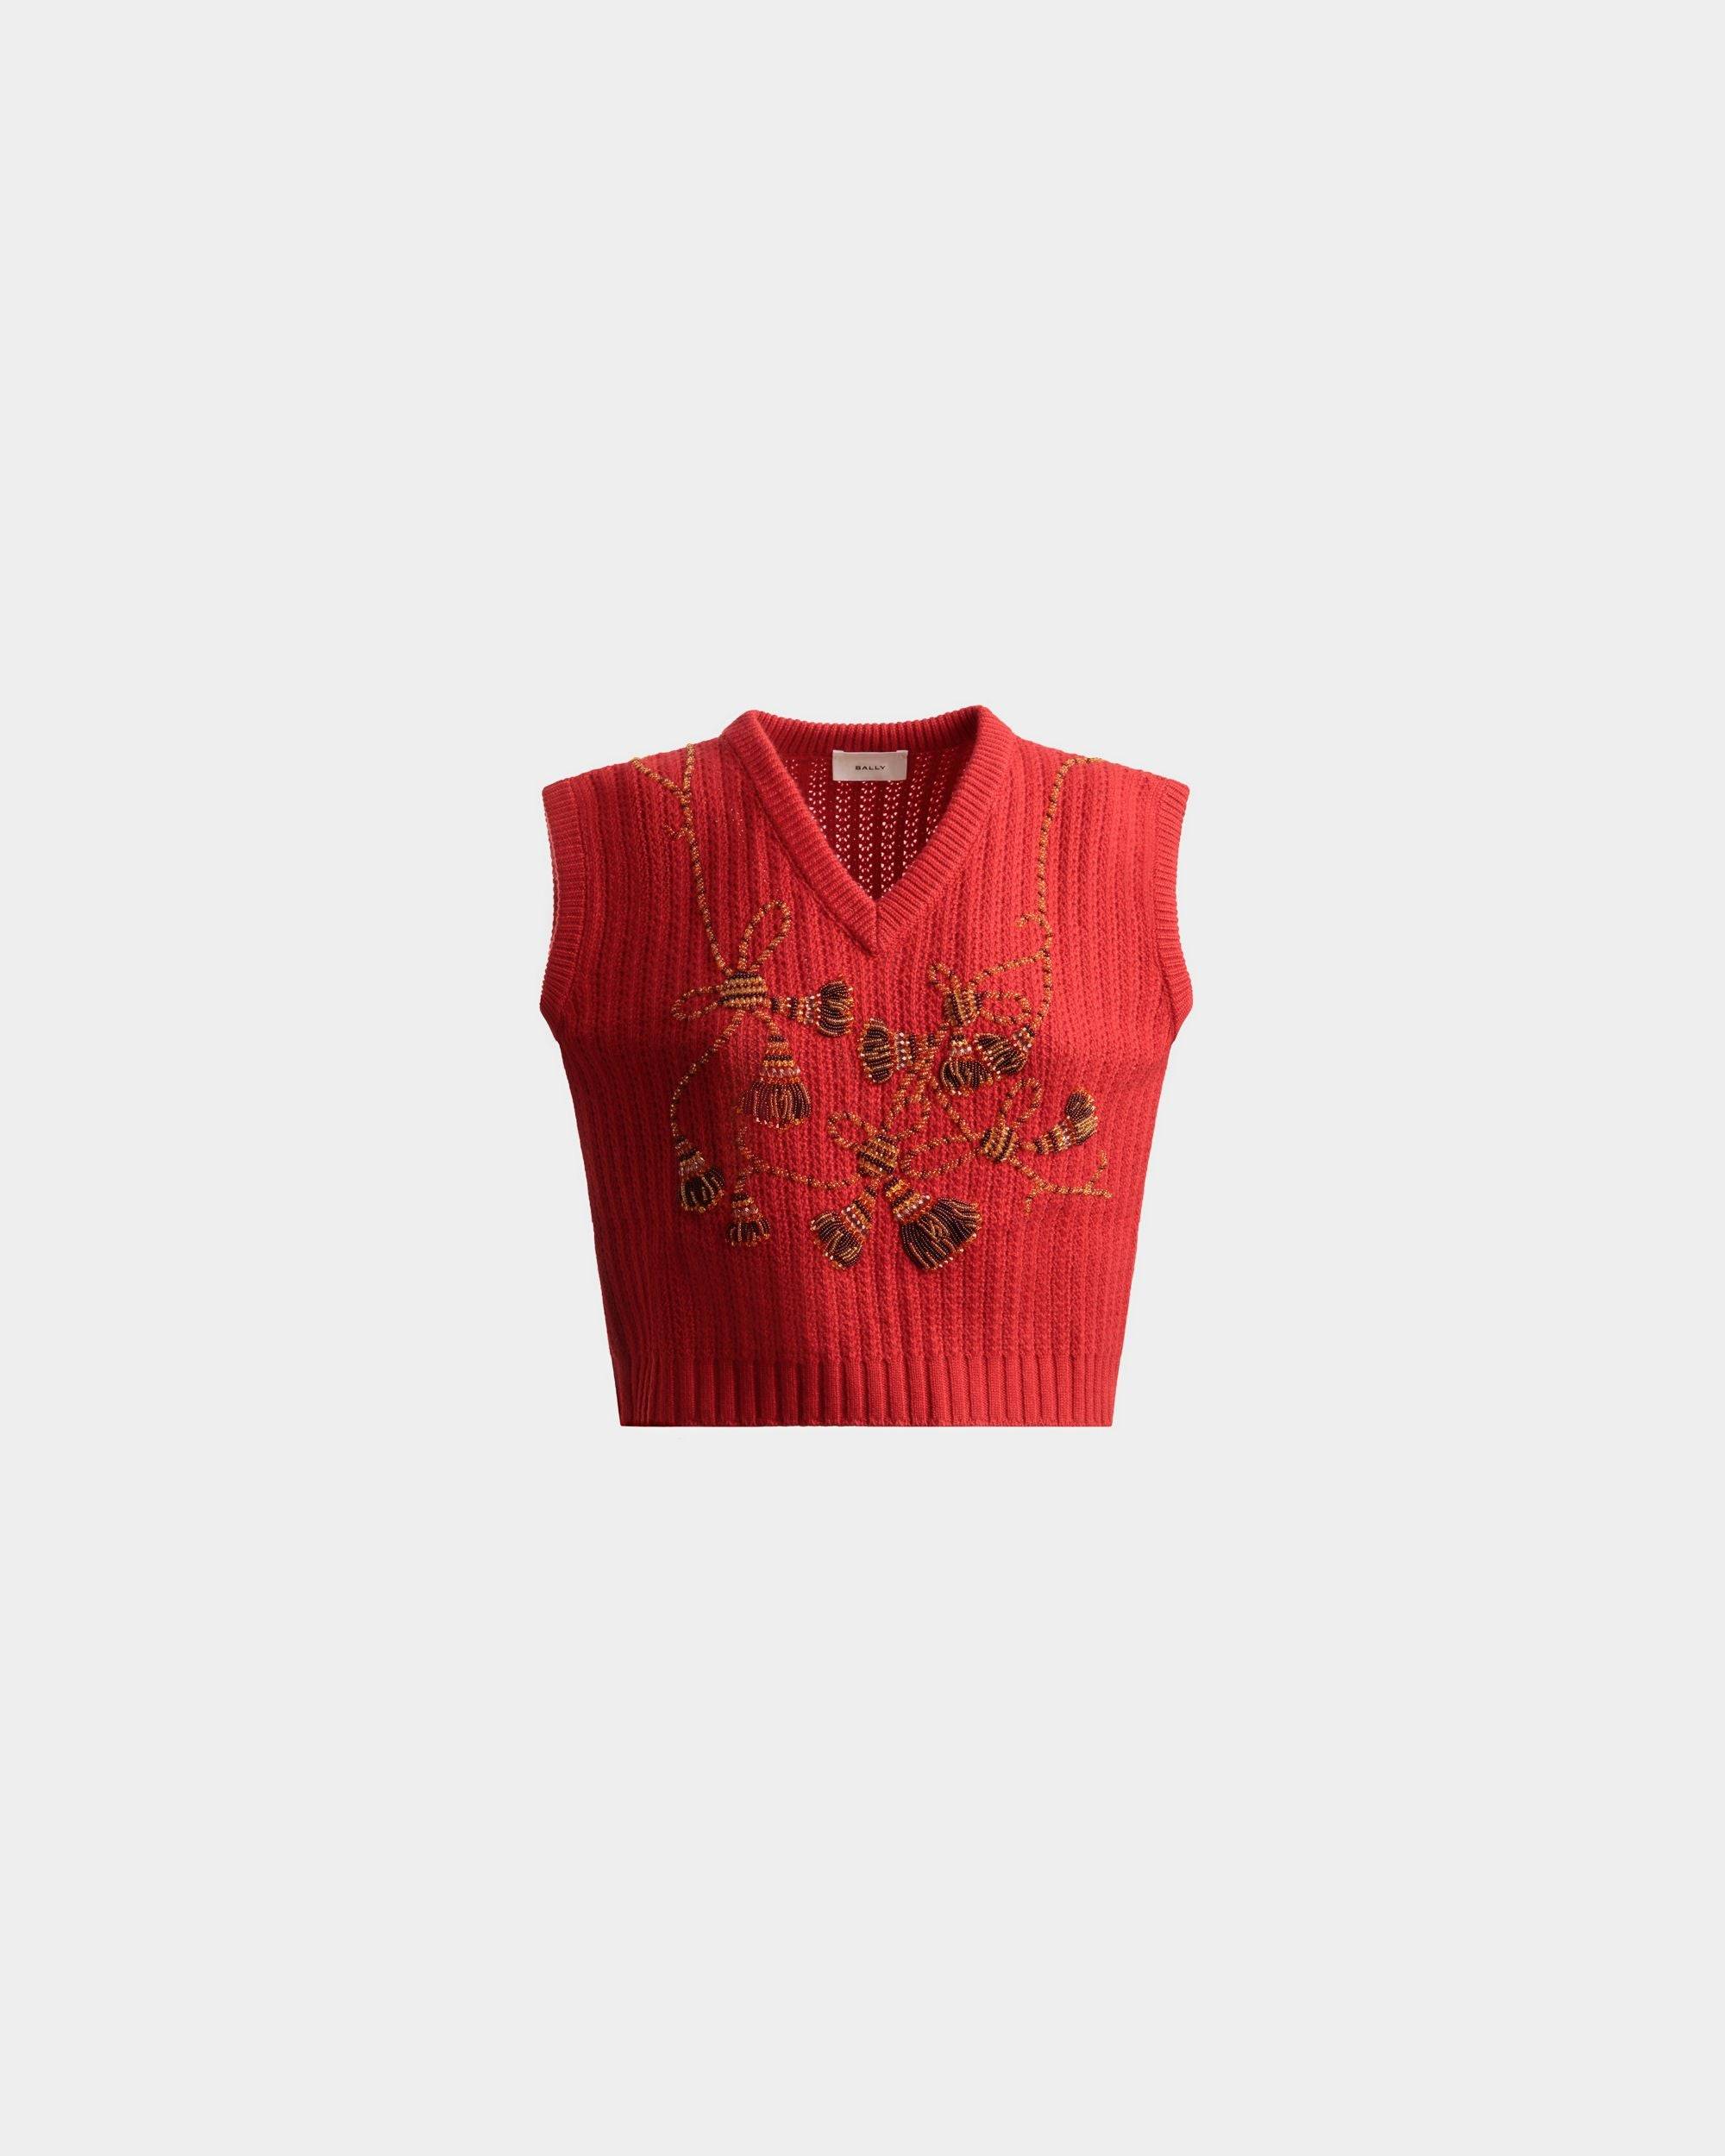 Women's Vest In Red Cashmere | Bally | Still Life Front